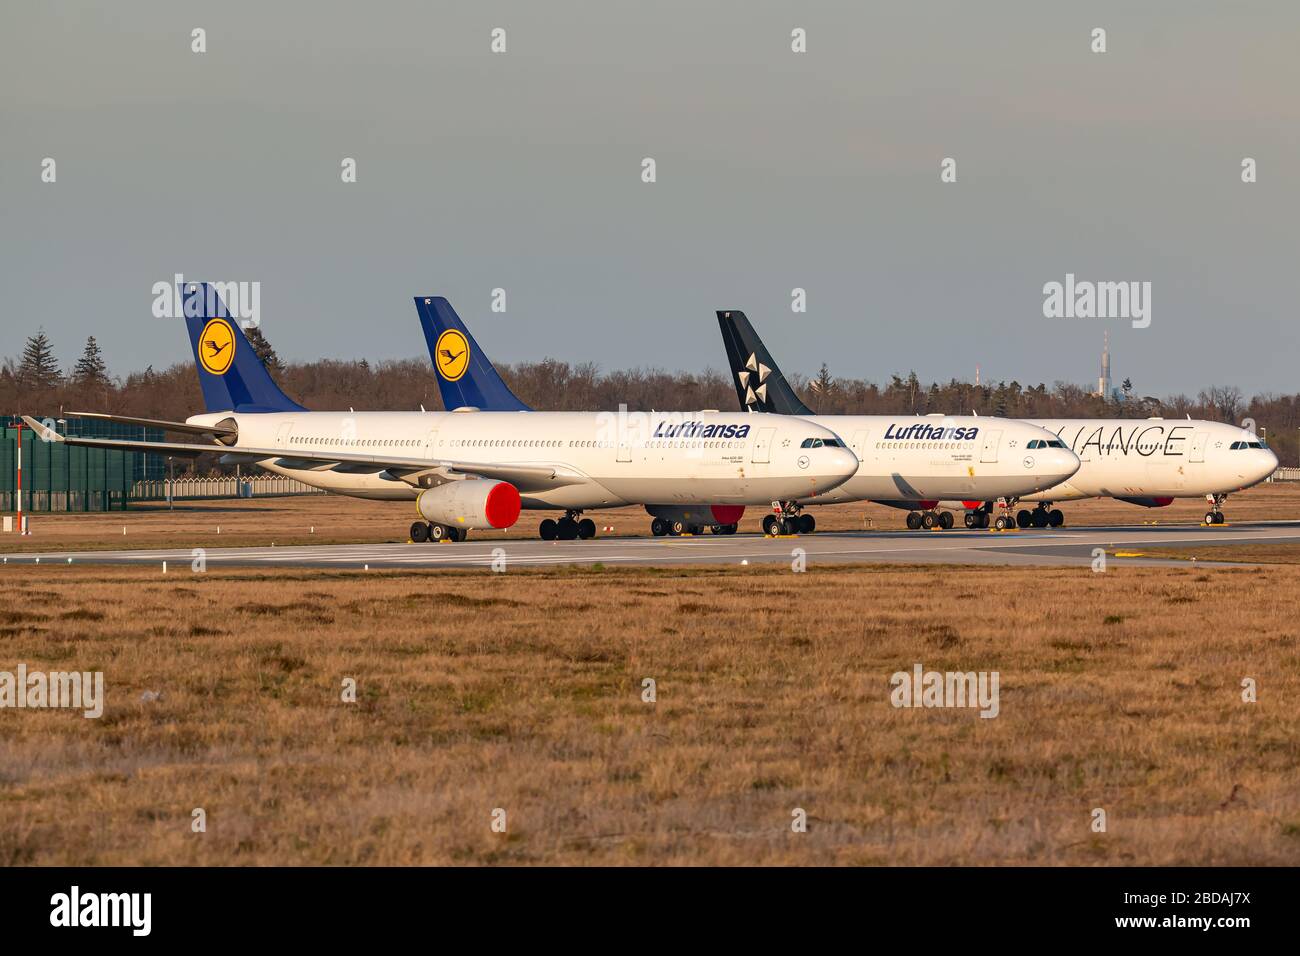 Frankfurt, Germany - April 7, 2020: Lufthansa Airbus A330 and A340 grounded and stored at Frankfurt airport (FRA) in the Germany. Airbus is an aircraf Stock Photo